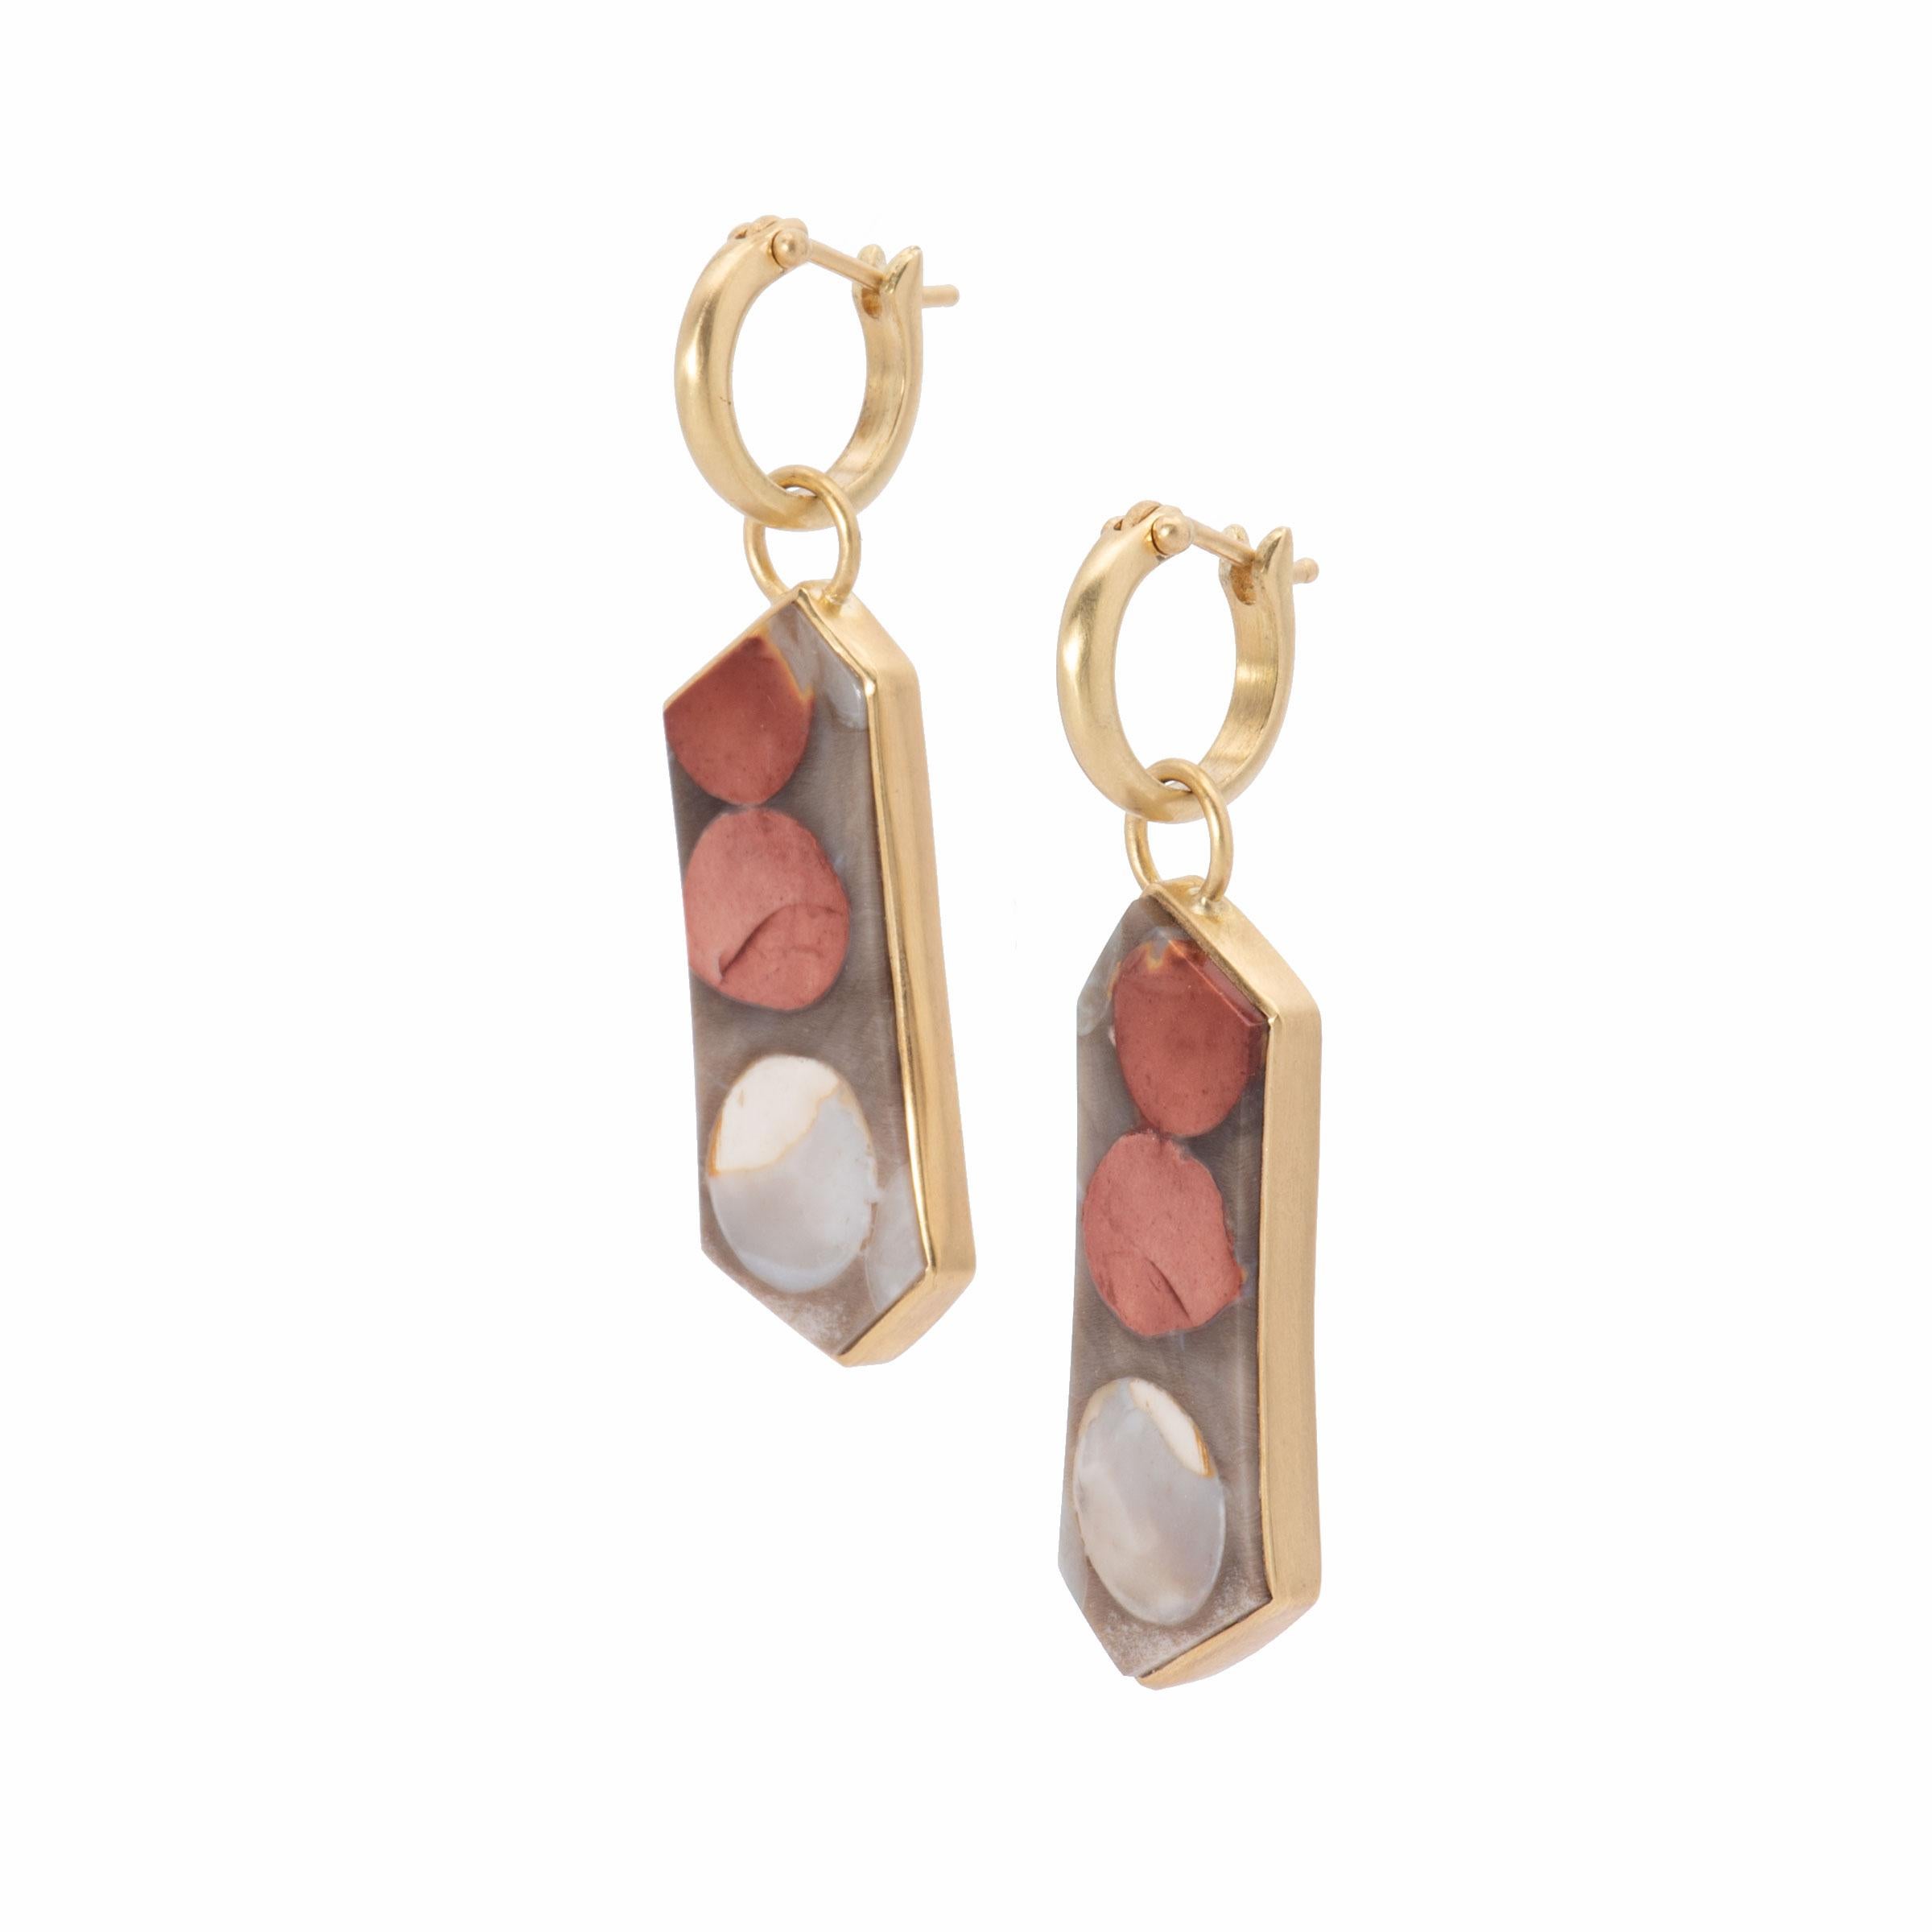 Peanut Wood Drop Earrings 18k gold have nothing to do with peanuts! Peanut wood is a fossil gem created by Australian conifer trees washed into the sea millions of years ago. Sea worms bored into the soft wood for food, and the round and oval